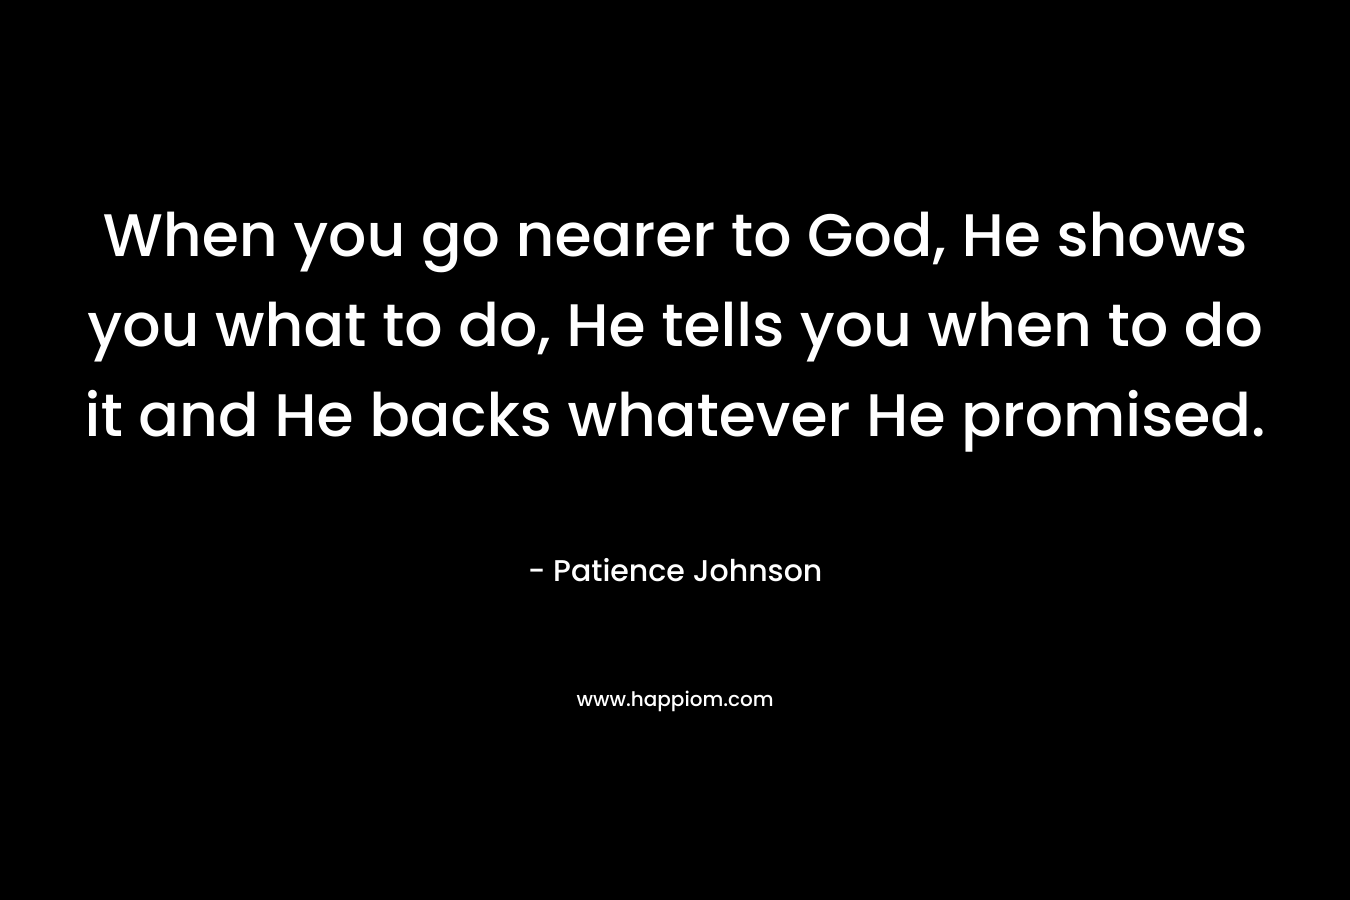 When you go nearer to God, He shows you what to do, He tells you when to do it and He backs whatever He promised.